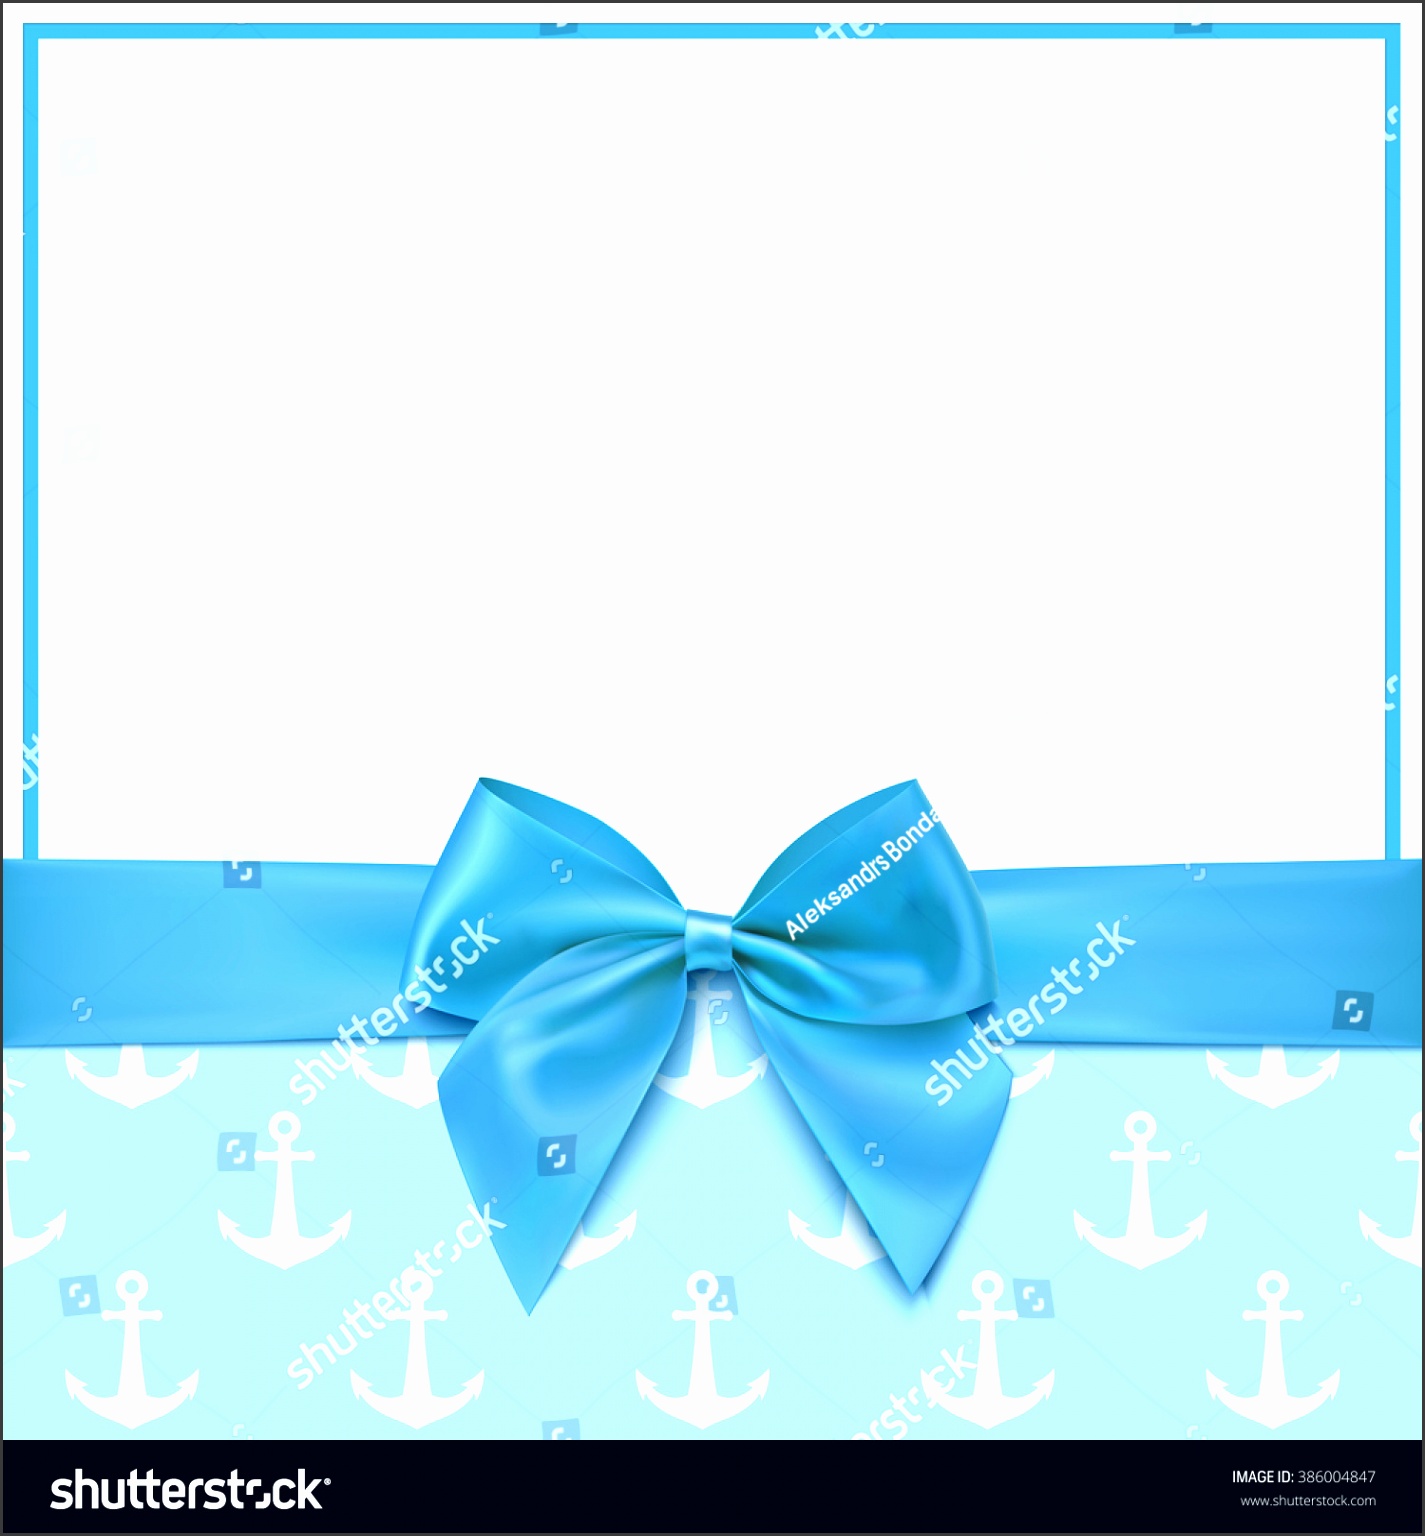 blank greeting card template for baby boy shower celebration birthday or baby boy announcement